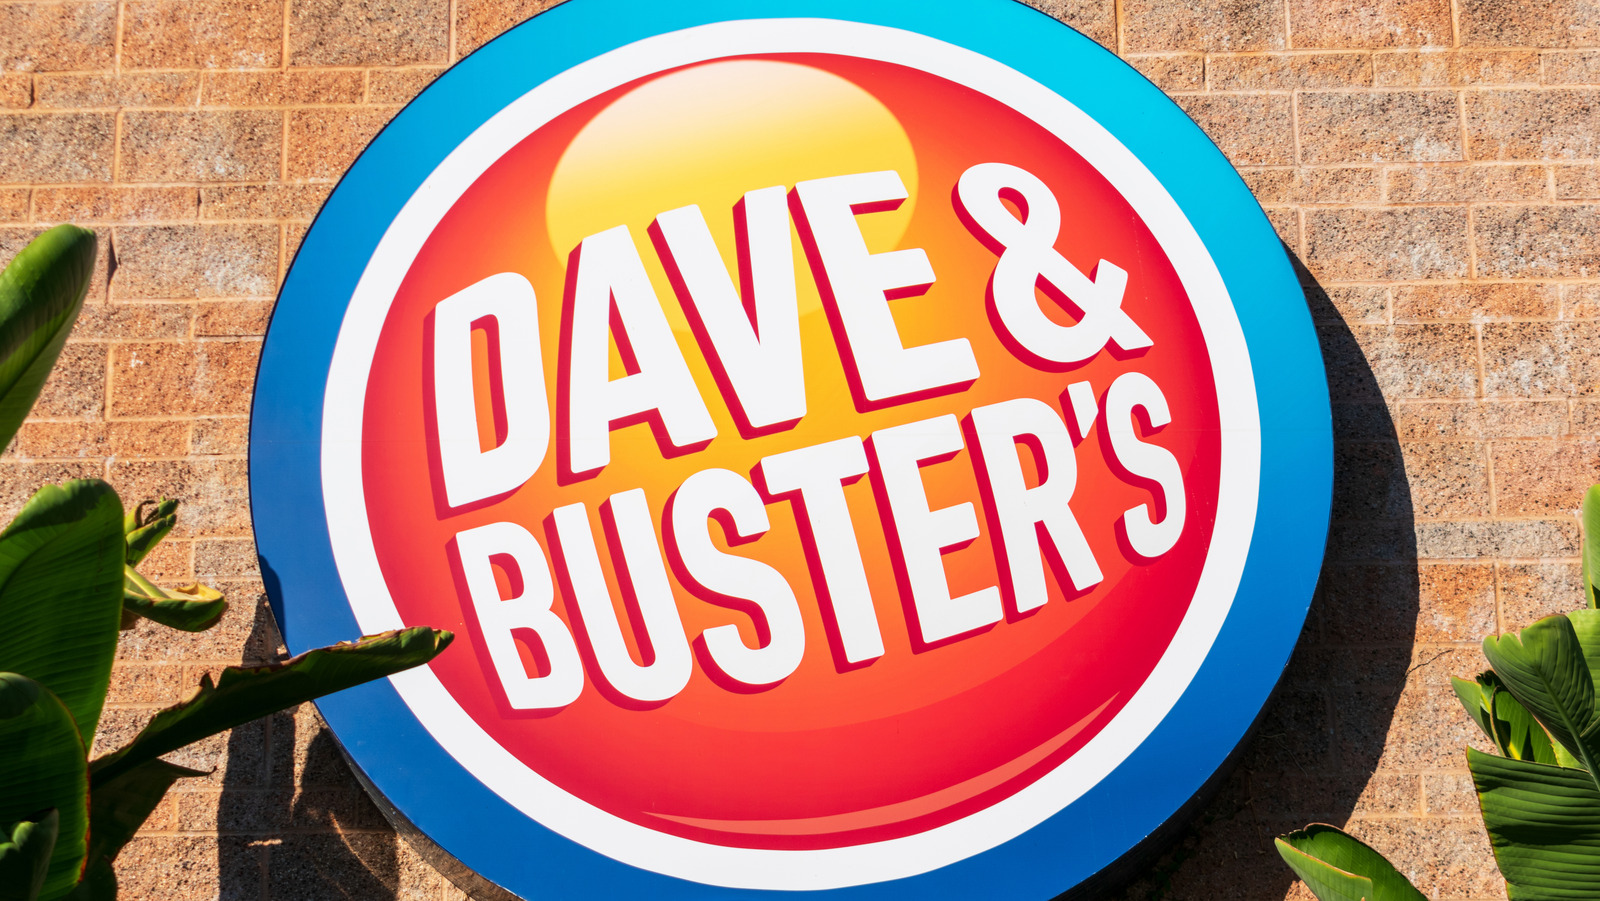 After a strong end to last year, Dave & Buster's sales slow in 2023